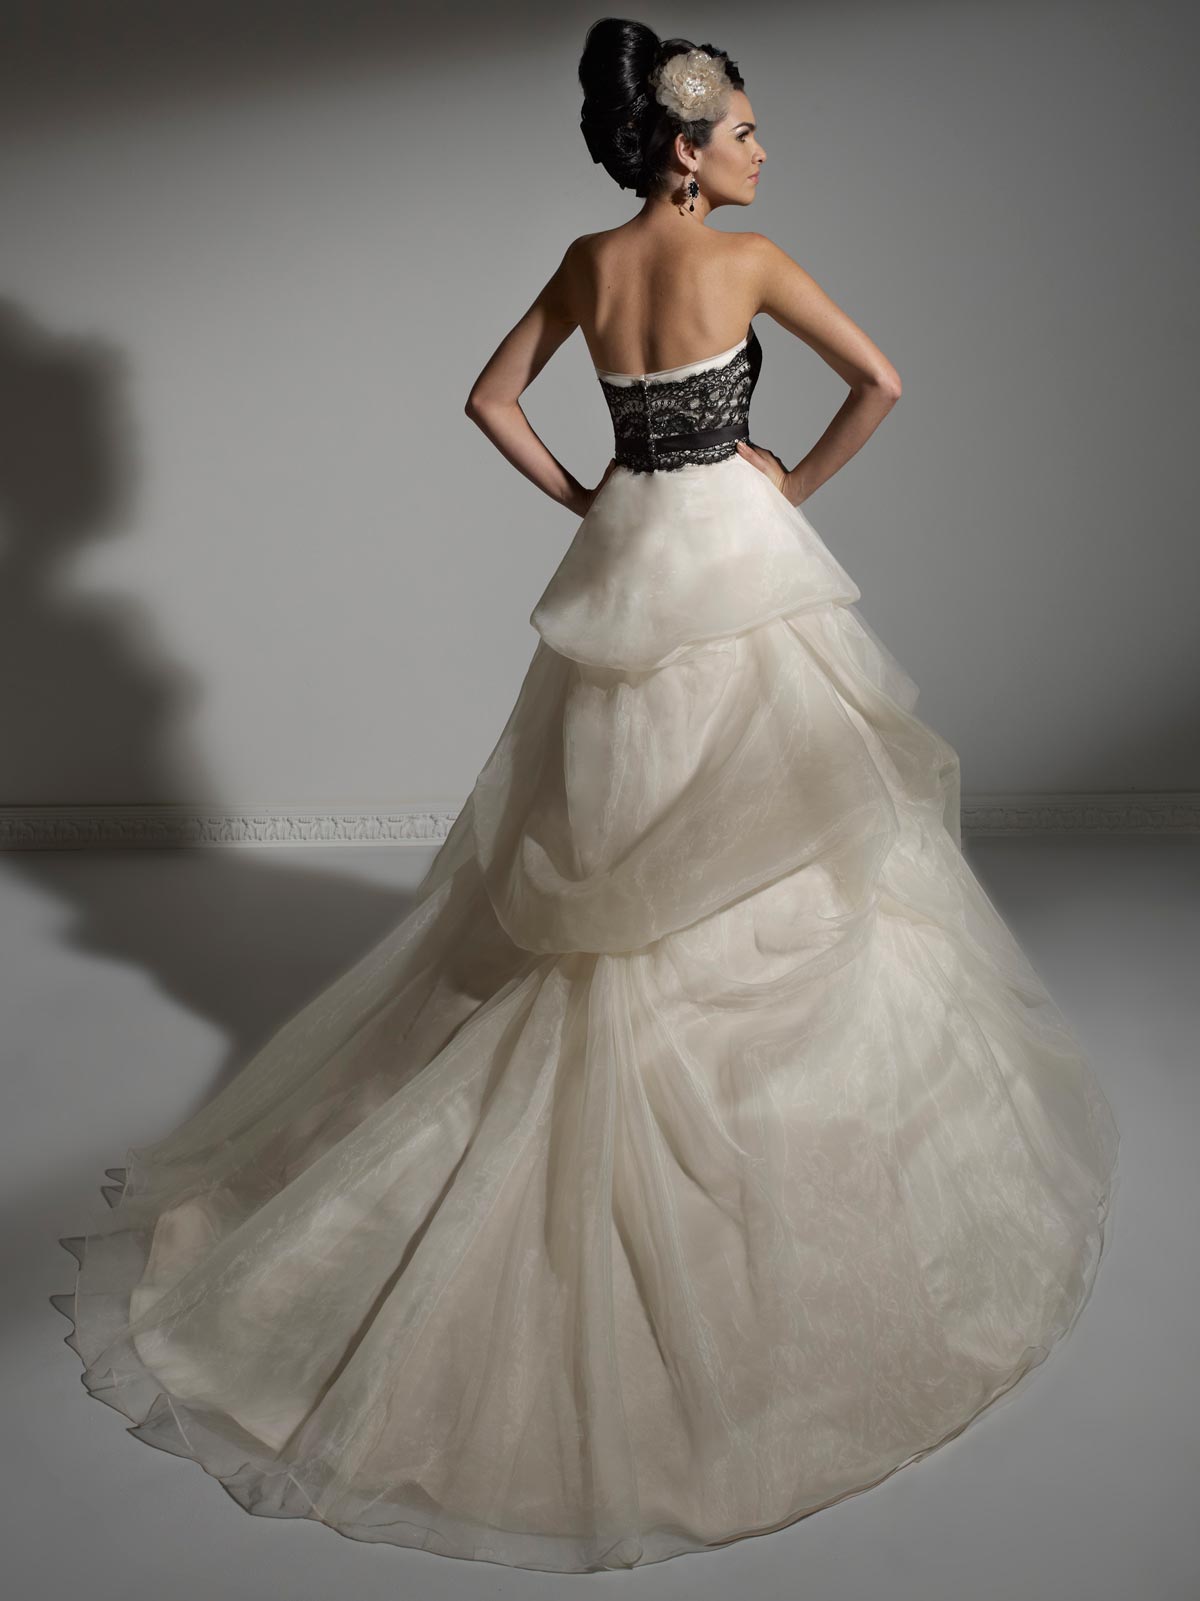 Black and White Colored Wedding Dresses